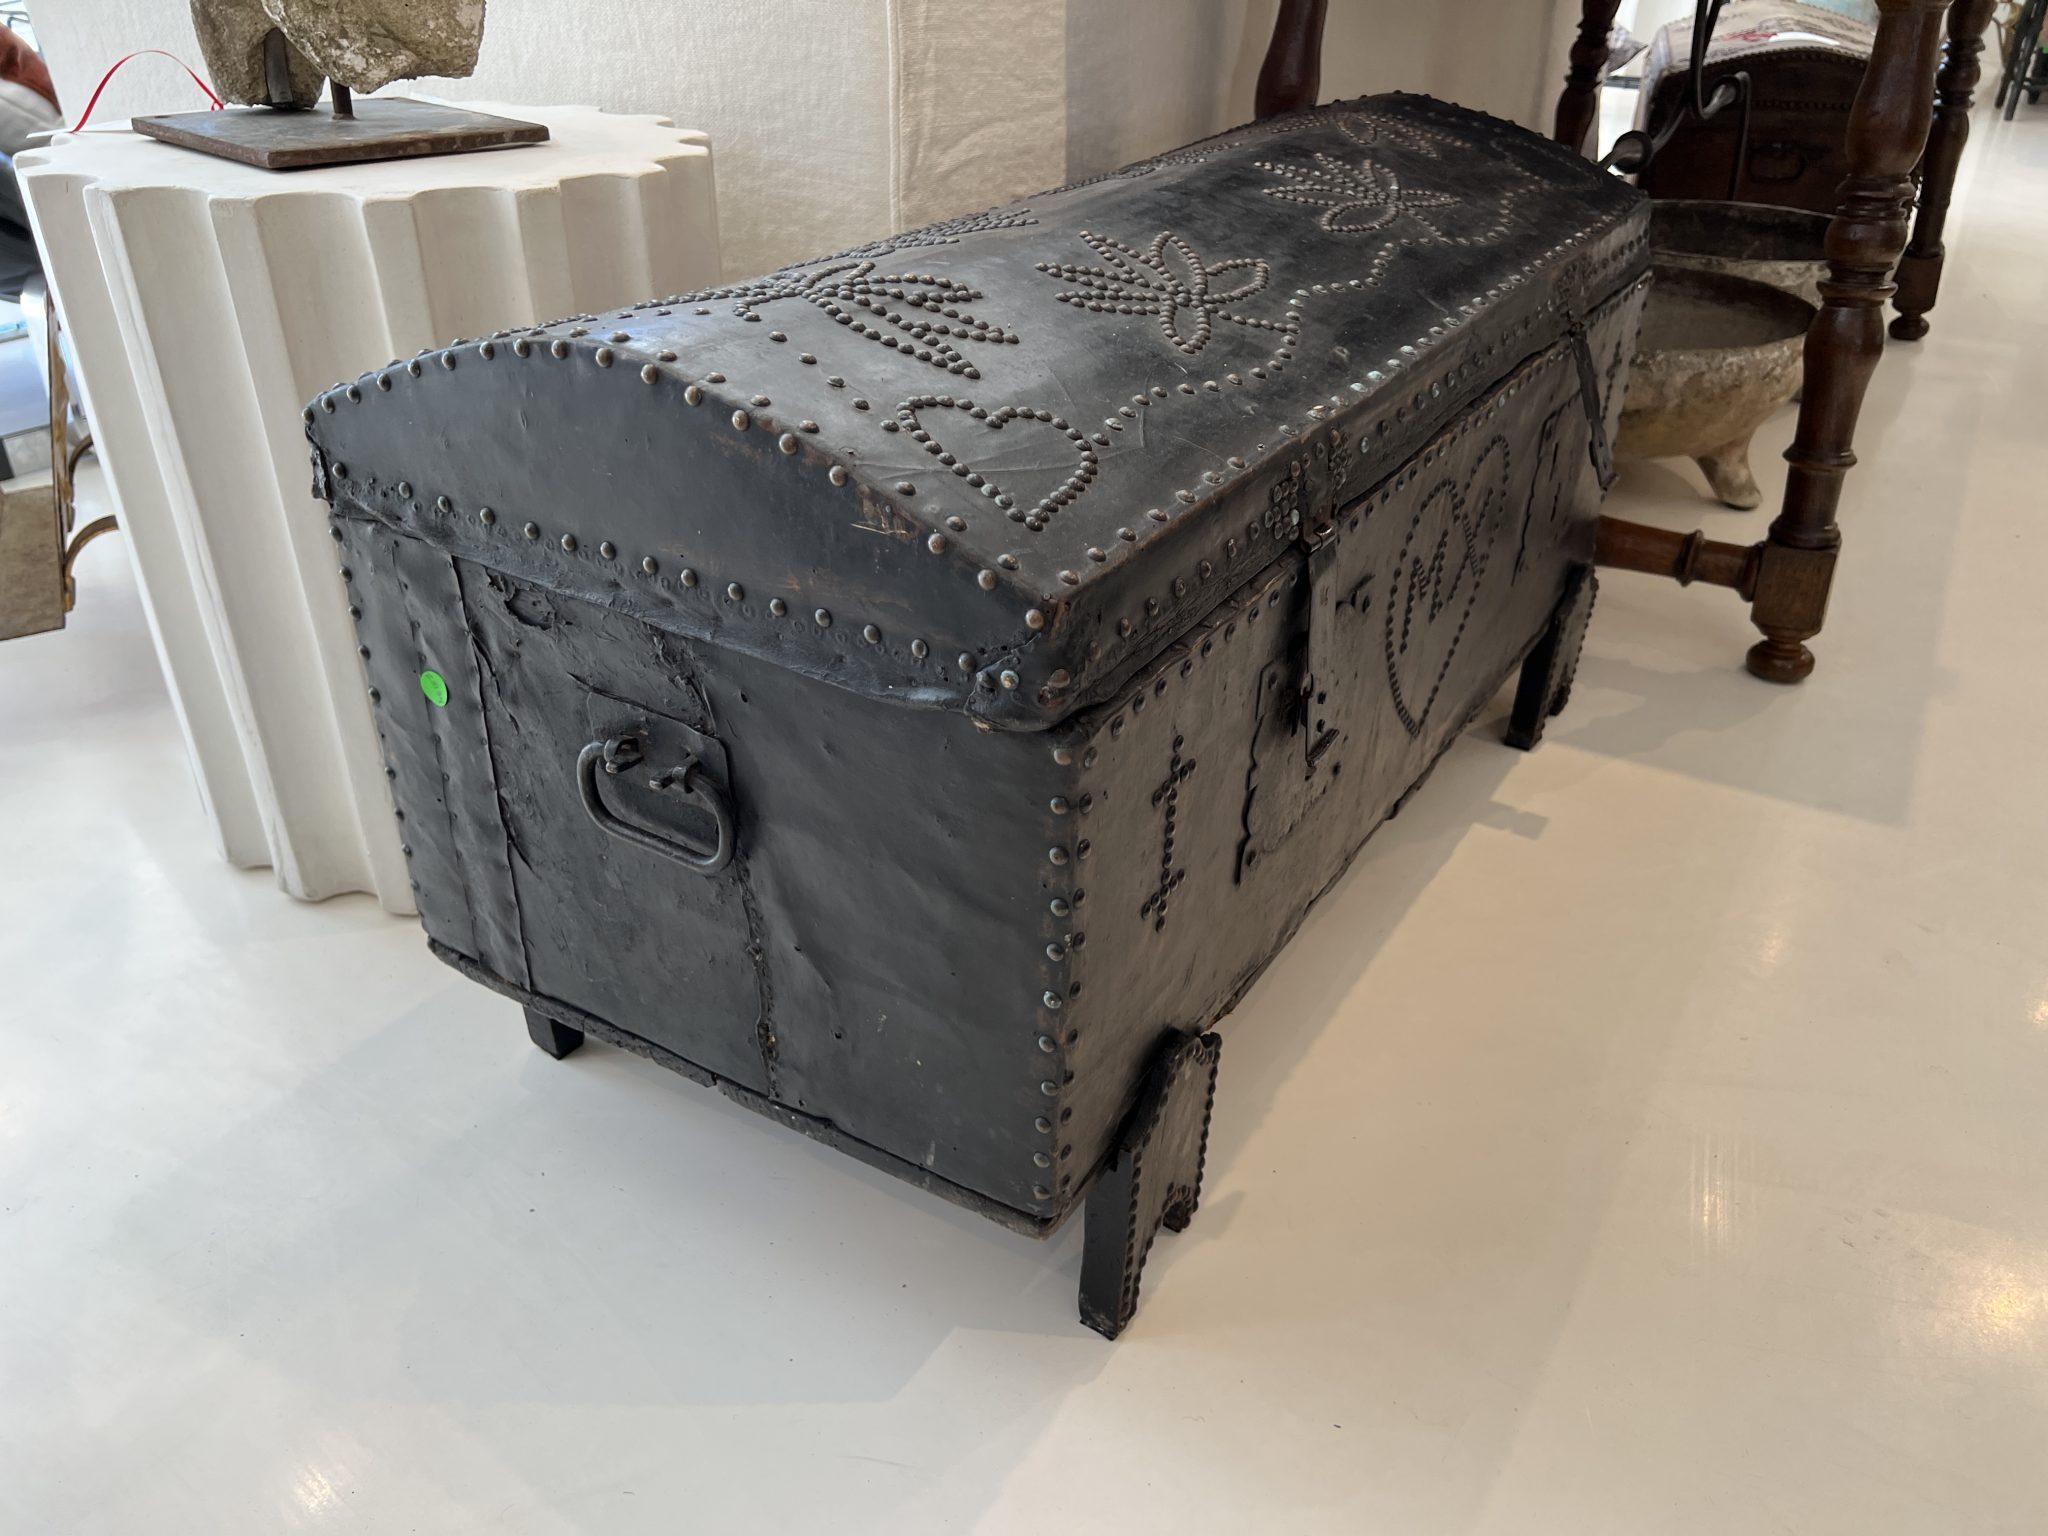 Black leather trunk with nailhead decoration in the shapes of hearts and flowers. Also has monogram of MX in a heart in front.